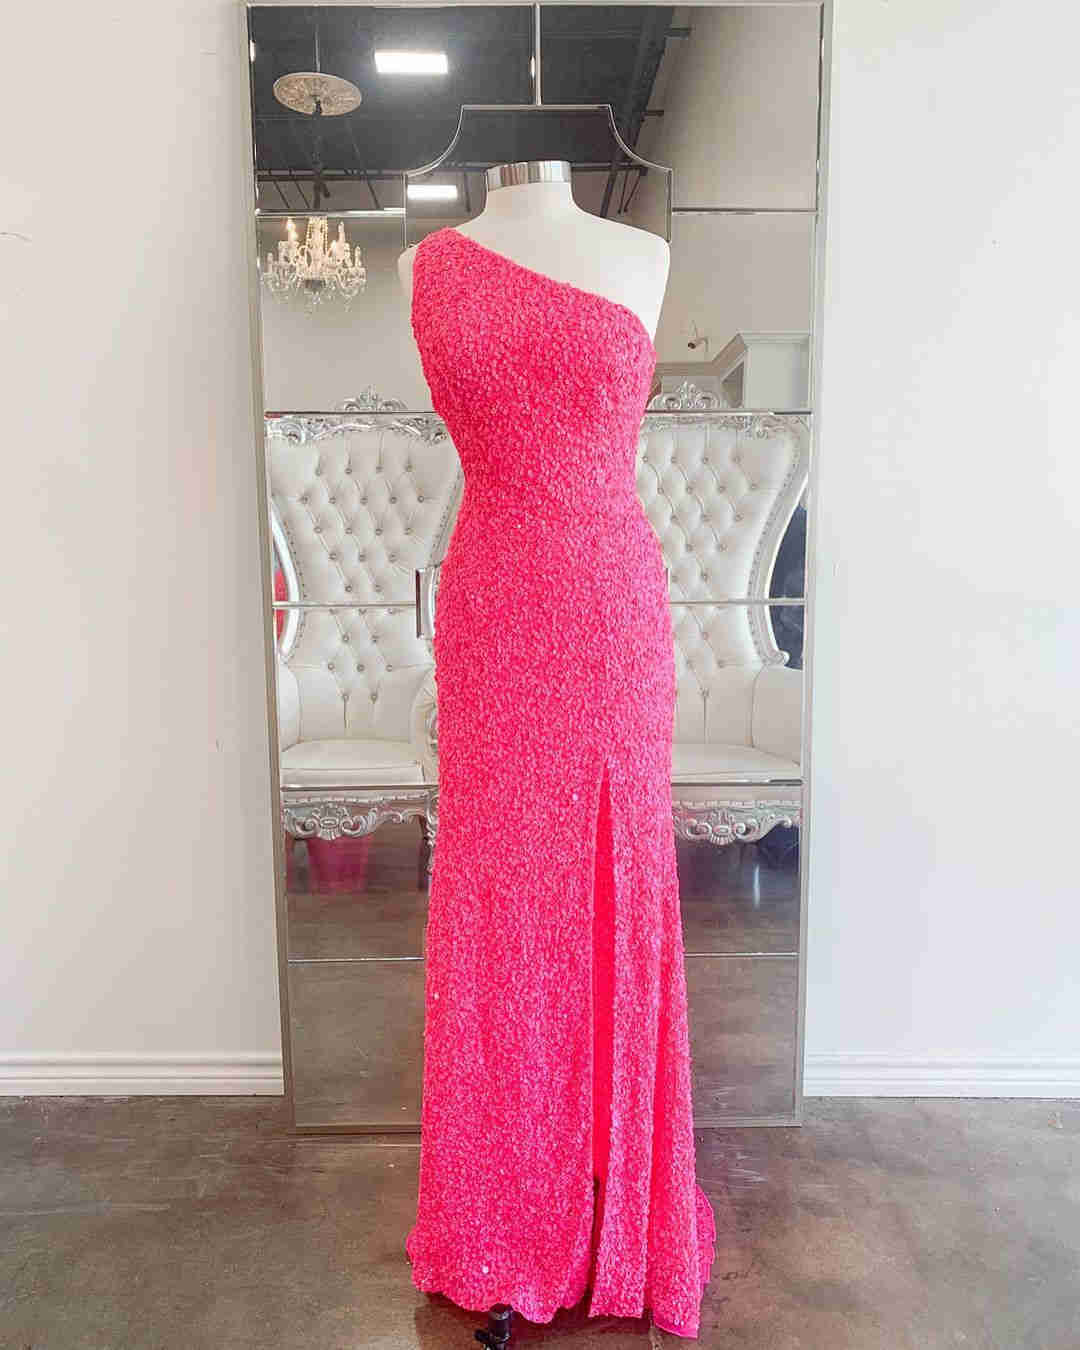 One Shoulder Hot Pink Sequined Prom Dress?One Shoulder Hot Pink Sequined Prom Dress?long dress,cheap dress,evening dress,bridal dress,prom dress 2021